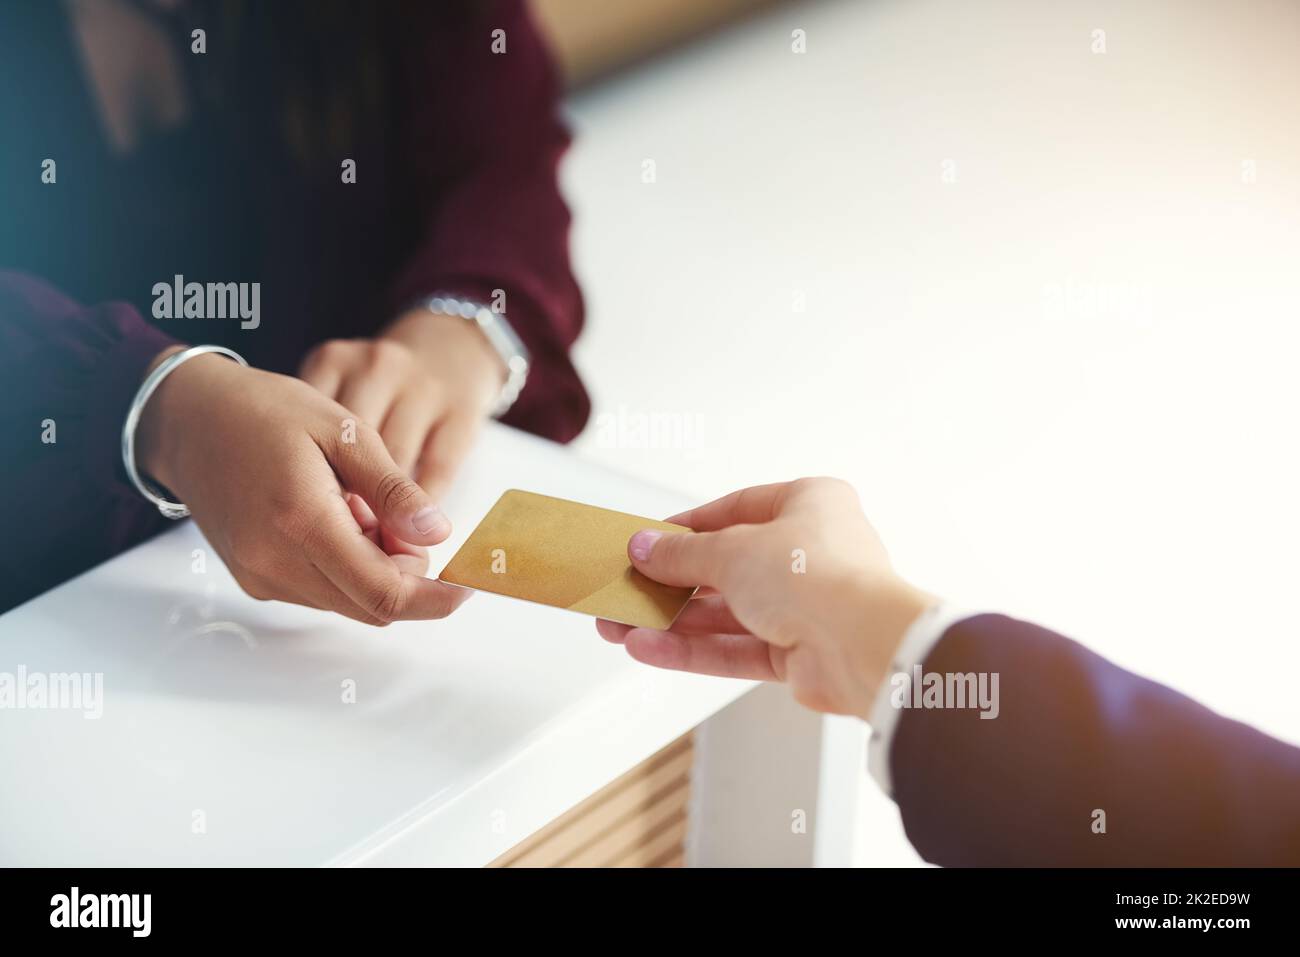 Put it on my card. Cropped shot of an unrecognisable person handing over a credit card for payment. Stock Photo